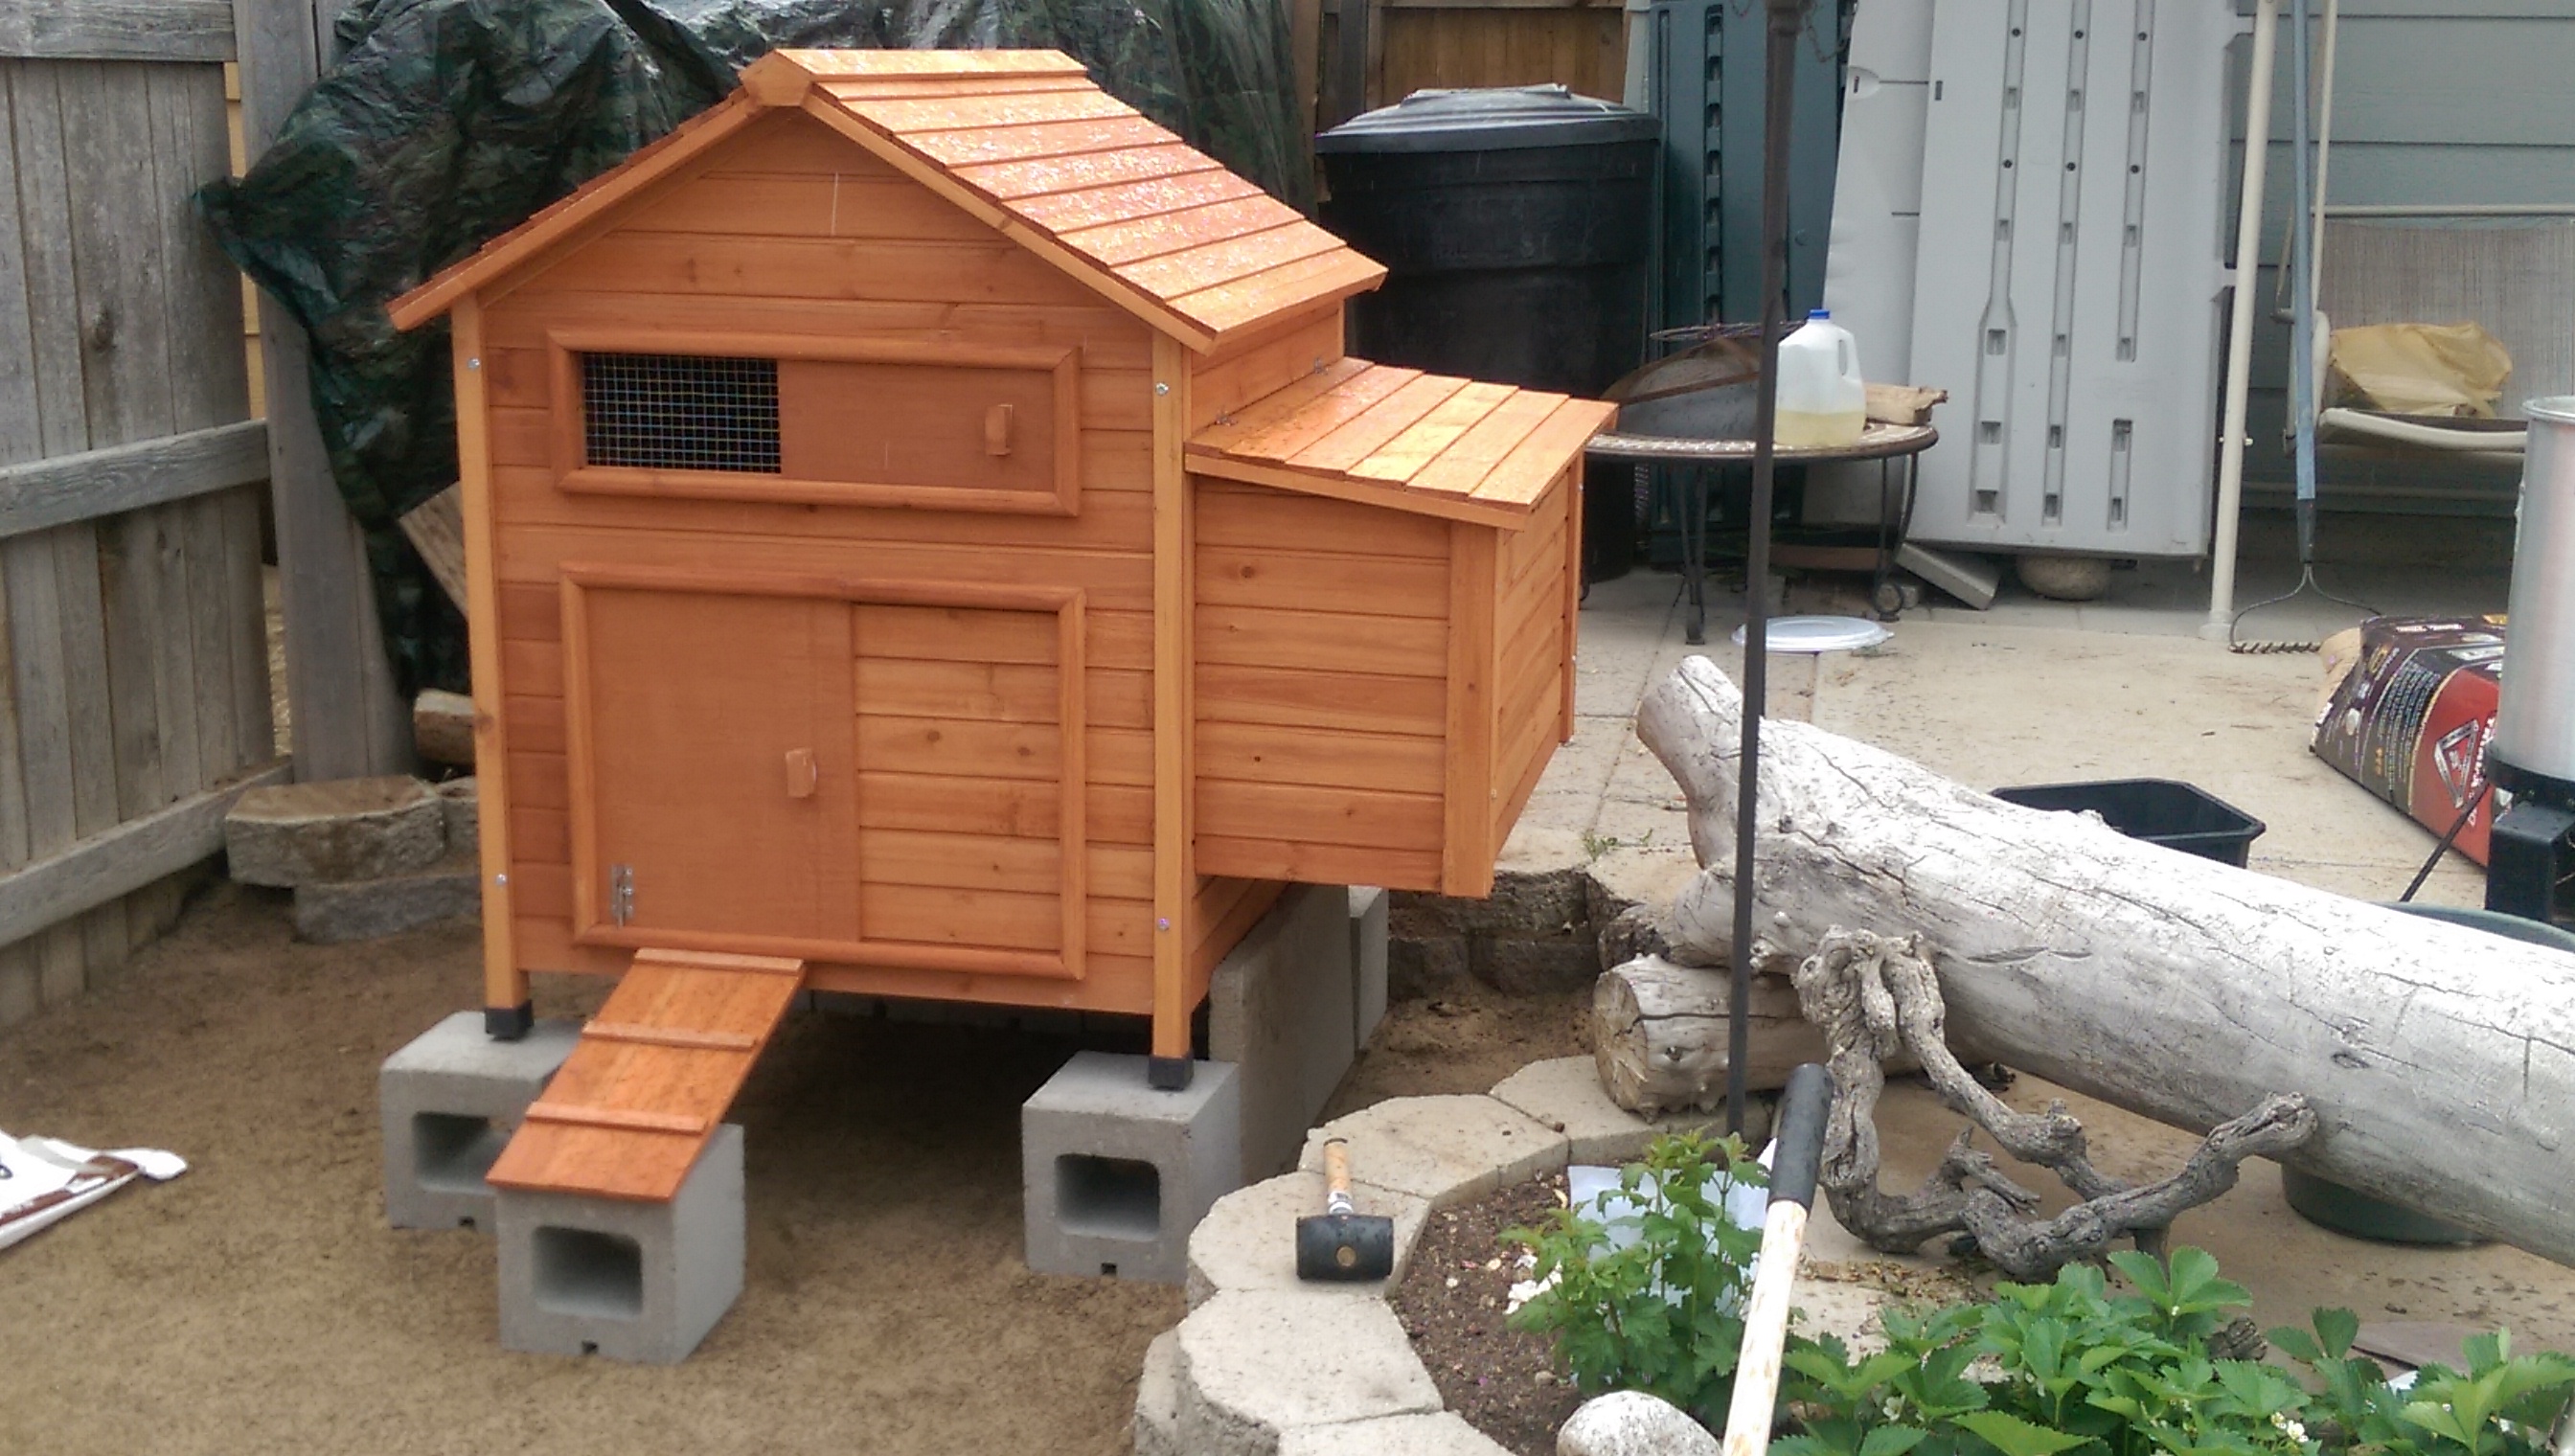 Our coop!  It has been moved back onto the cement to allow for more room for them to roam.  We still have a few weeks before the girls get to move into their new home